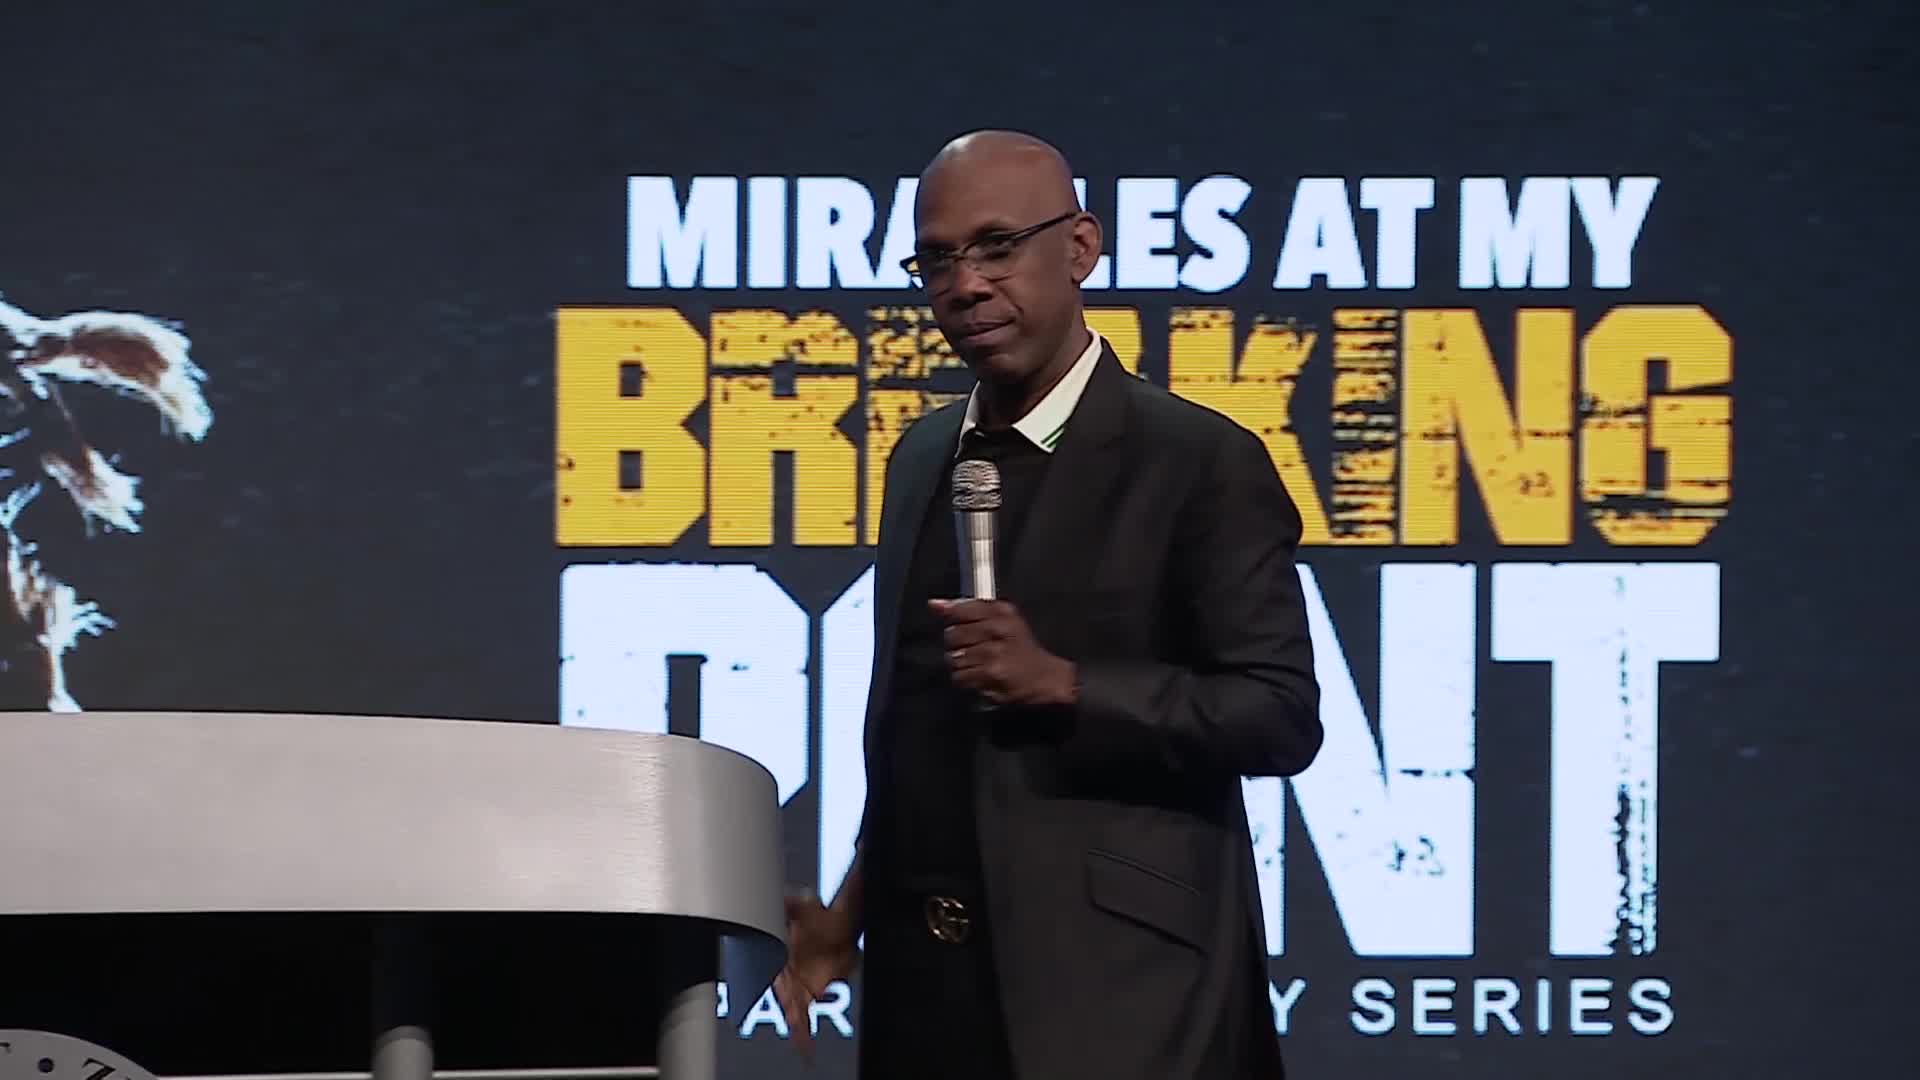 Joseph W Walker III - Miracles At My Breaking Point Series Broadcast Part 2